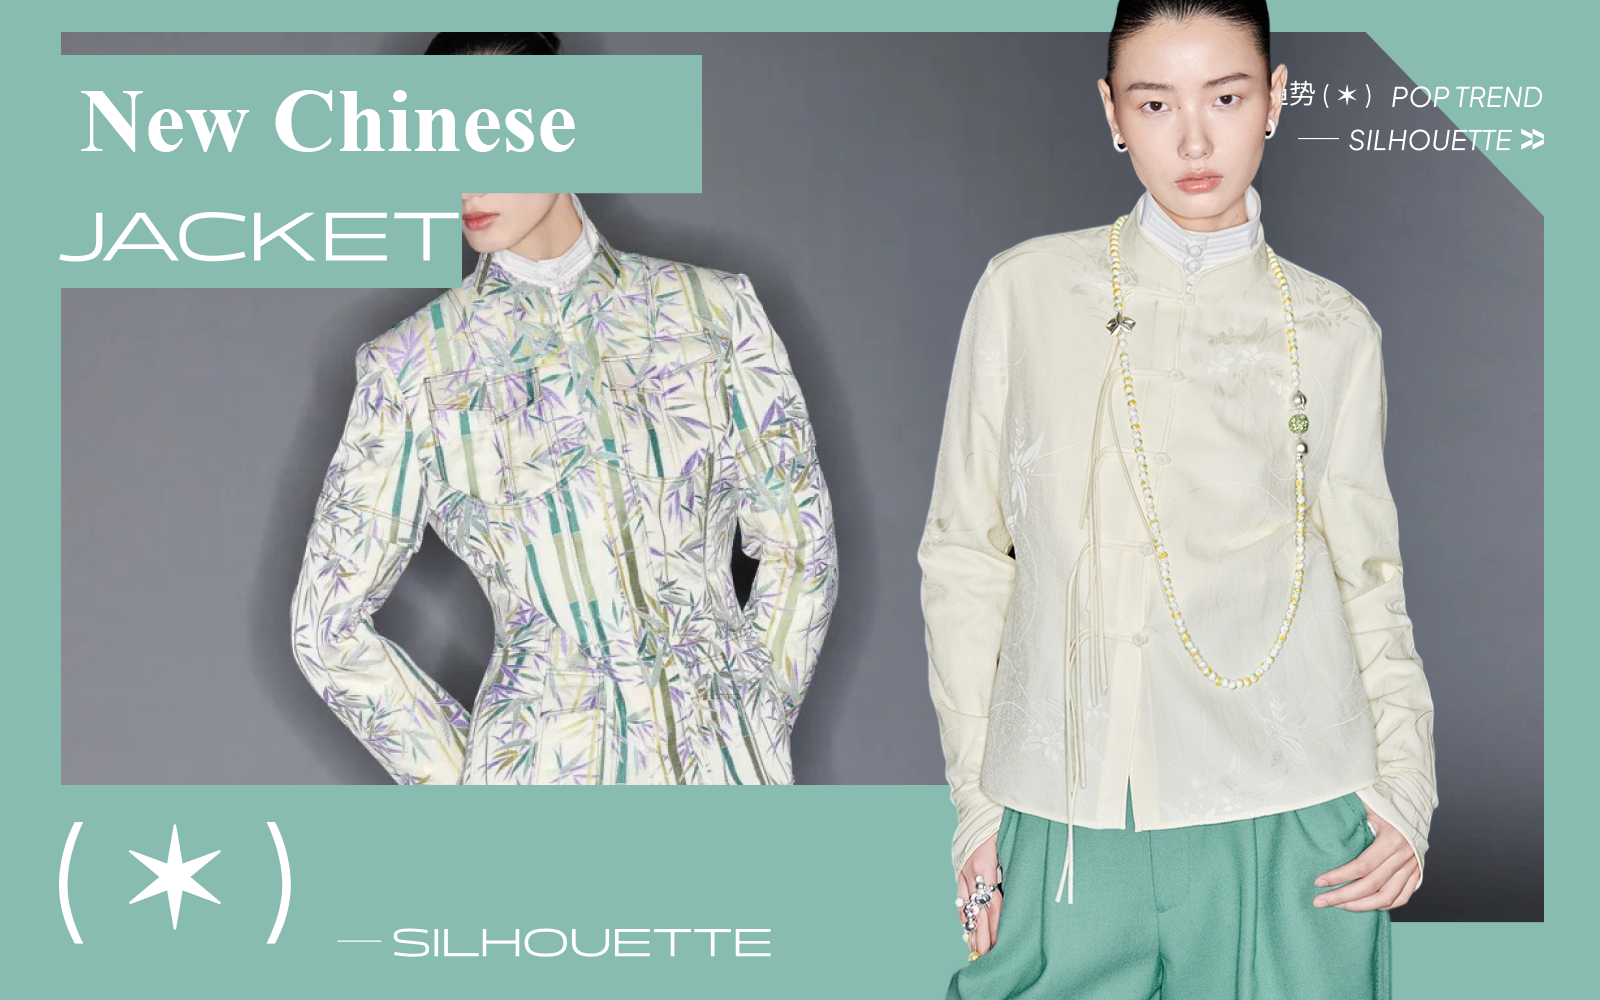 Elegant Chinese Style -- The Silhouette Trend for Women's Jacket